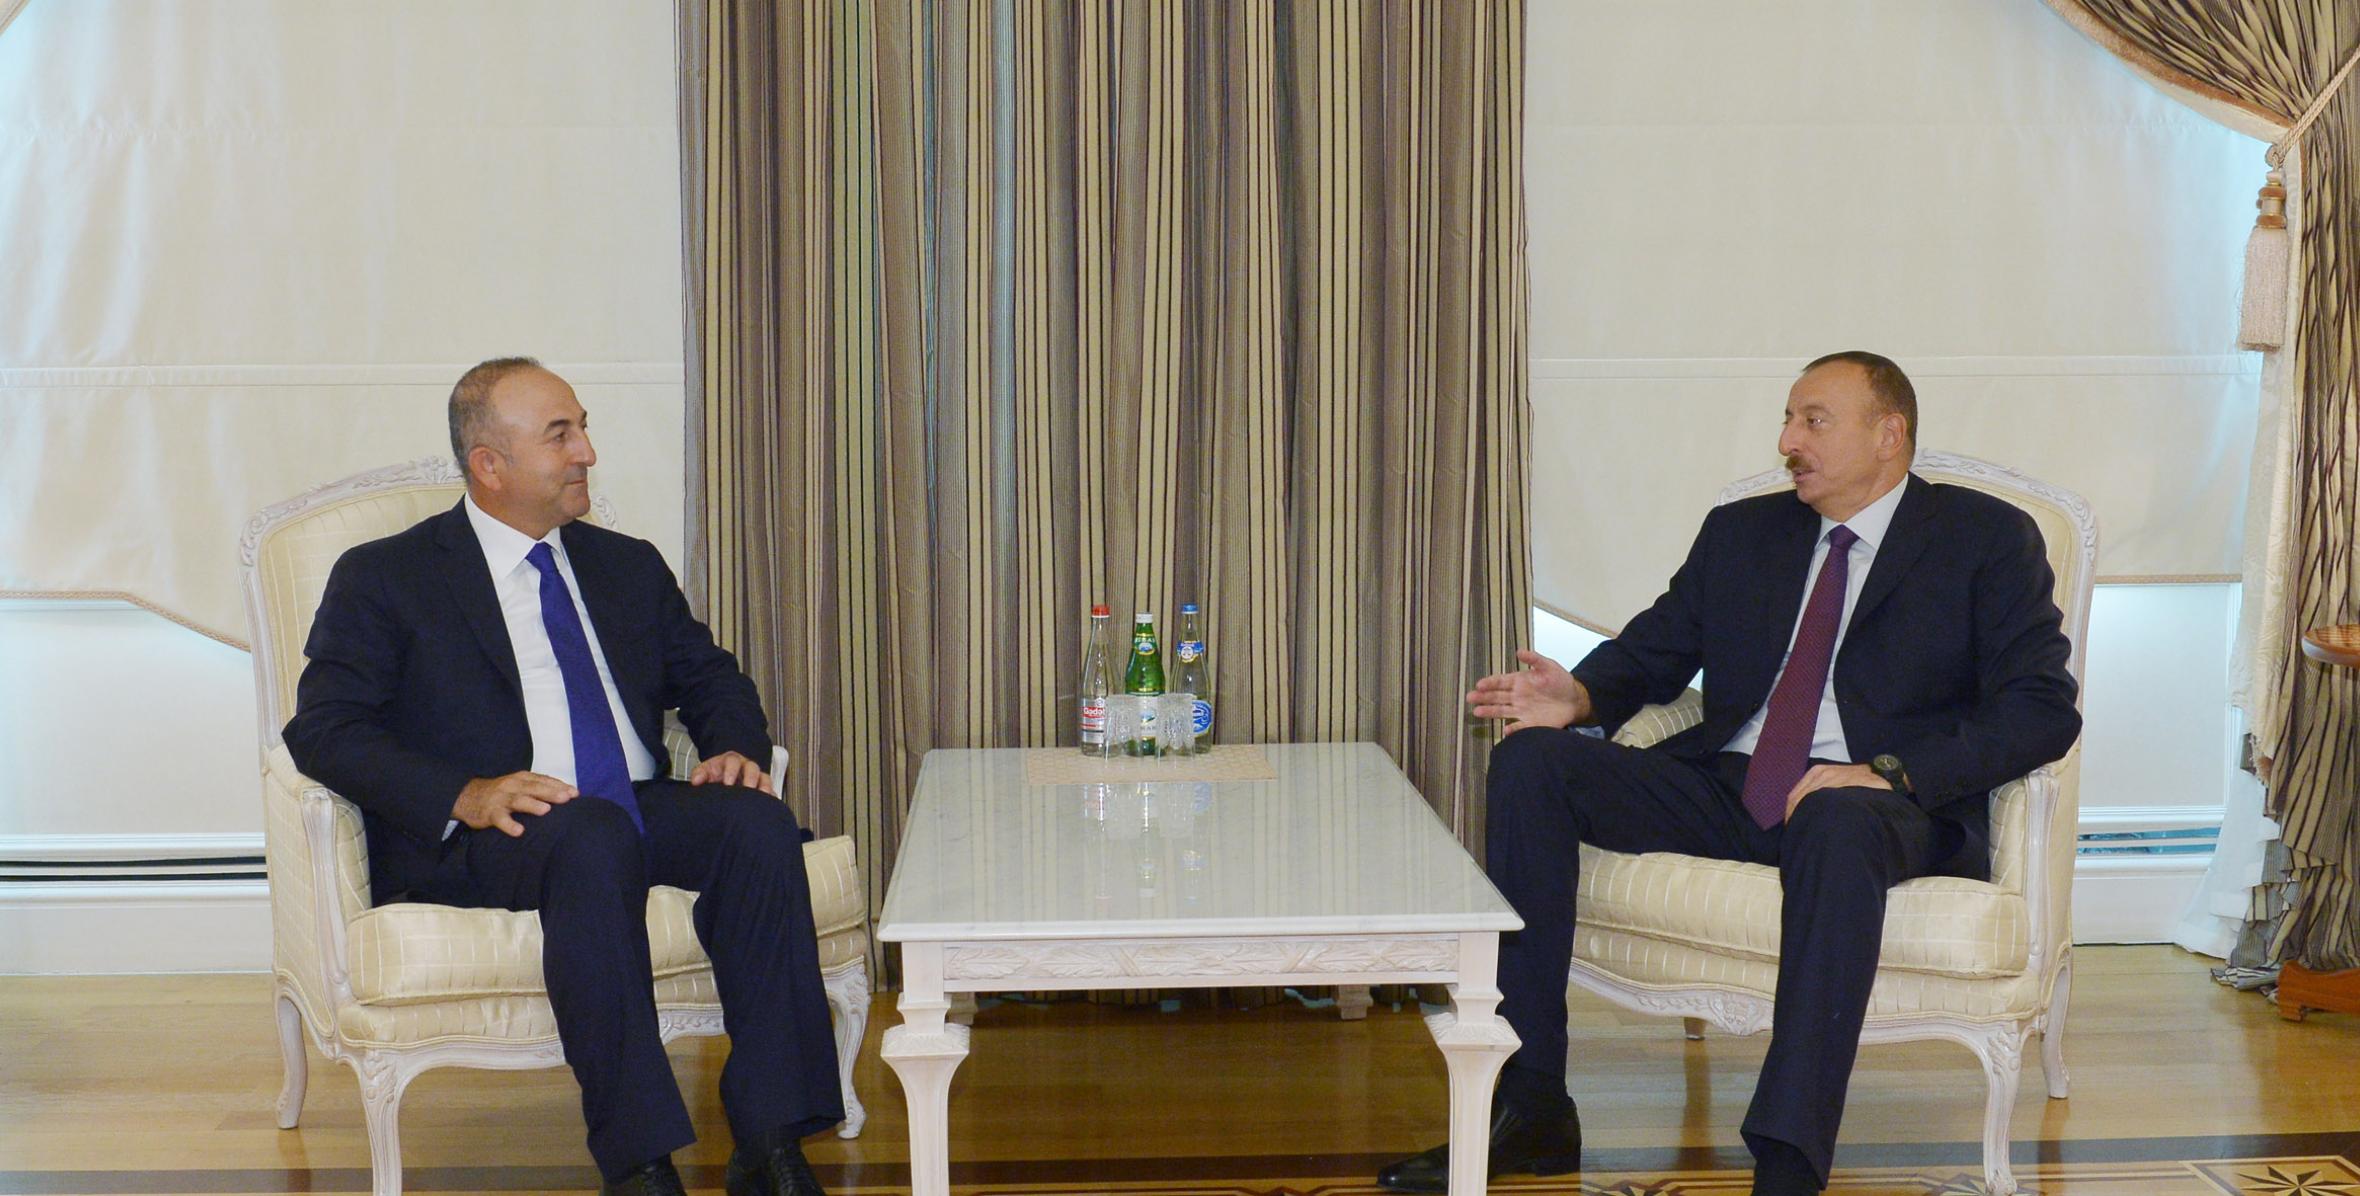 Ilham Aliyev received the Minister for European Union Affairs of Turkey